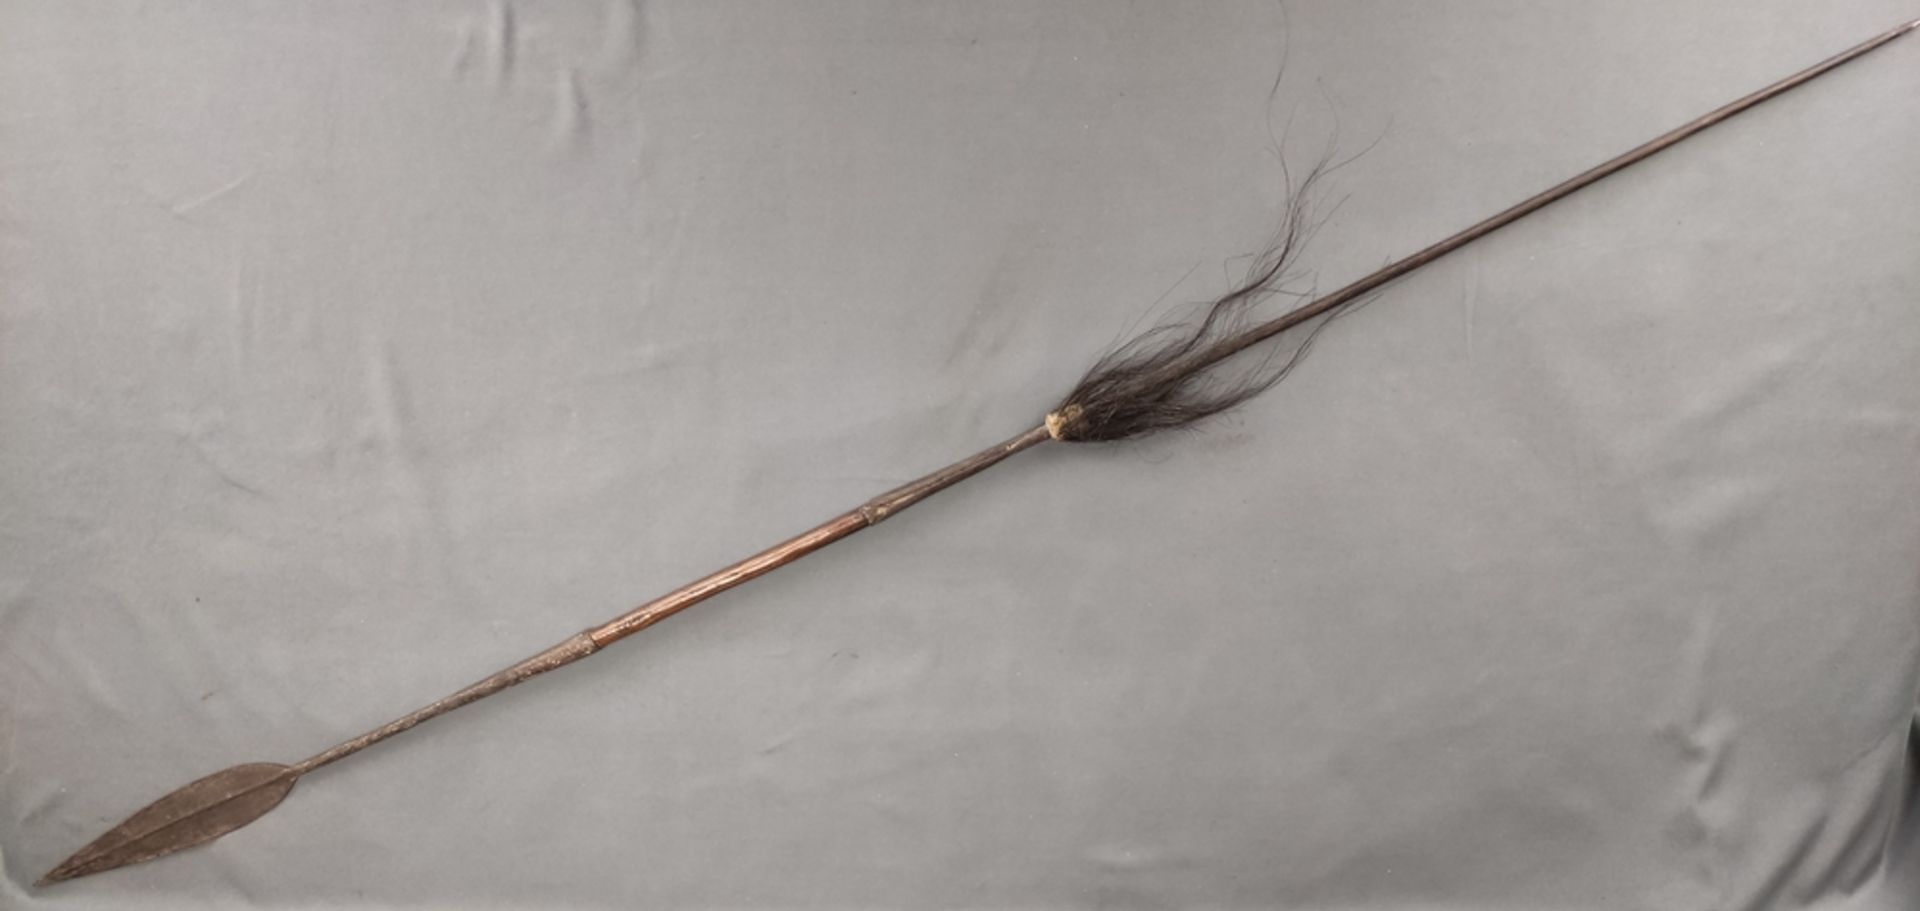 Spear with metal tip, middle part made of wood, lower part made of metal, decoration with hair, - Image 2 of 5